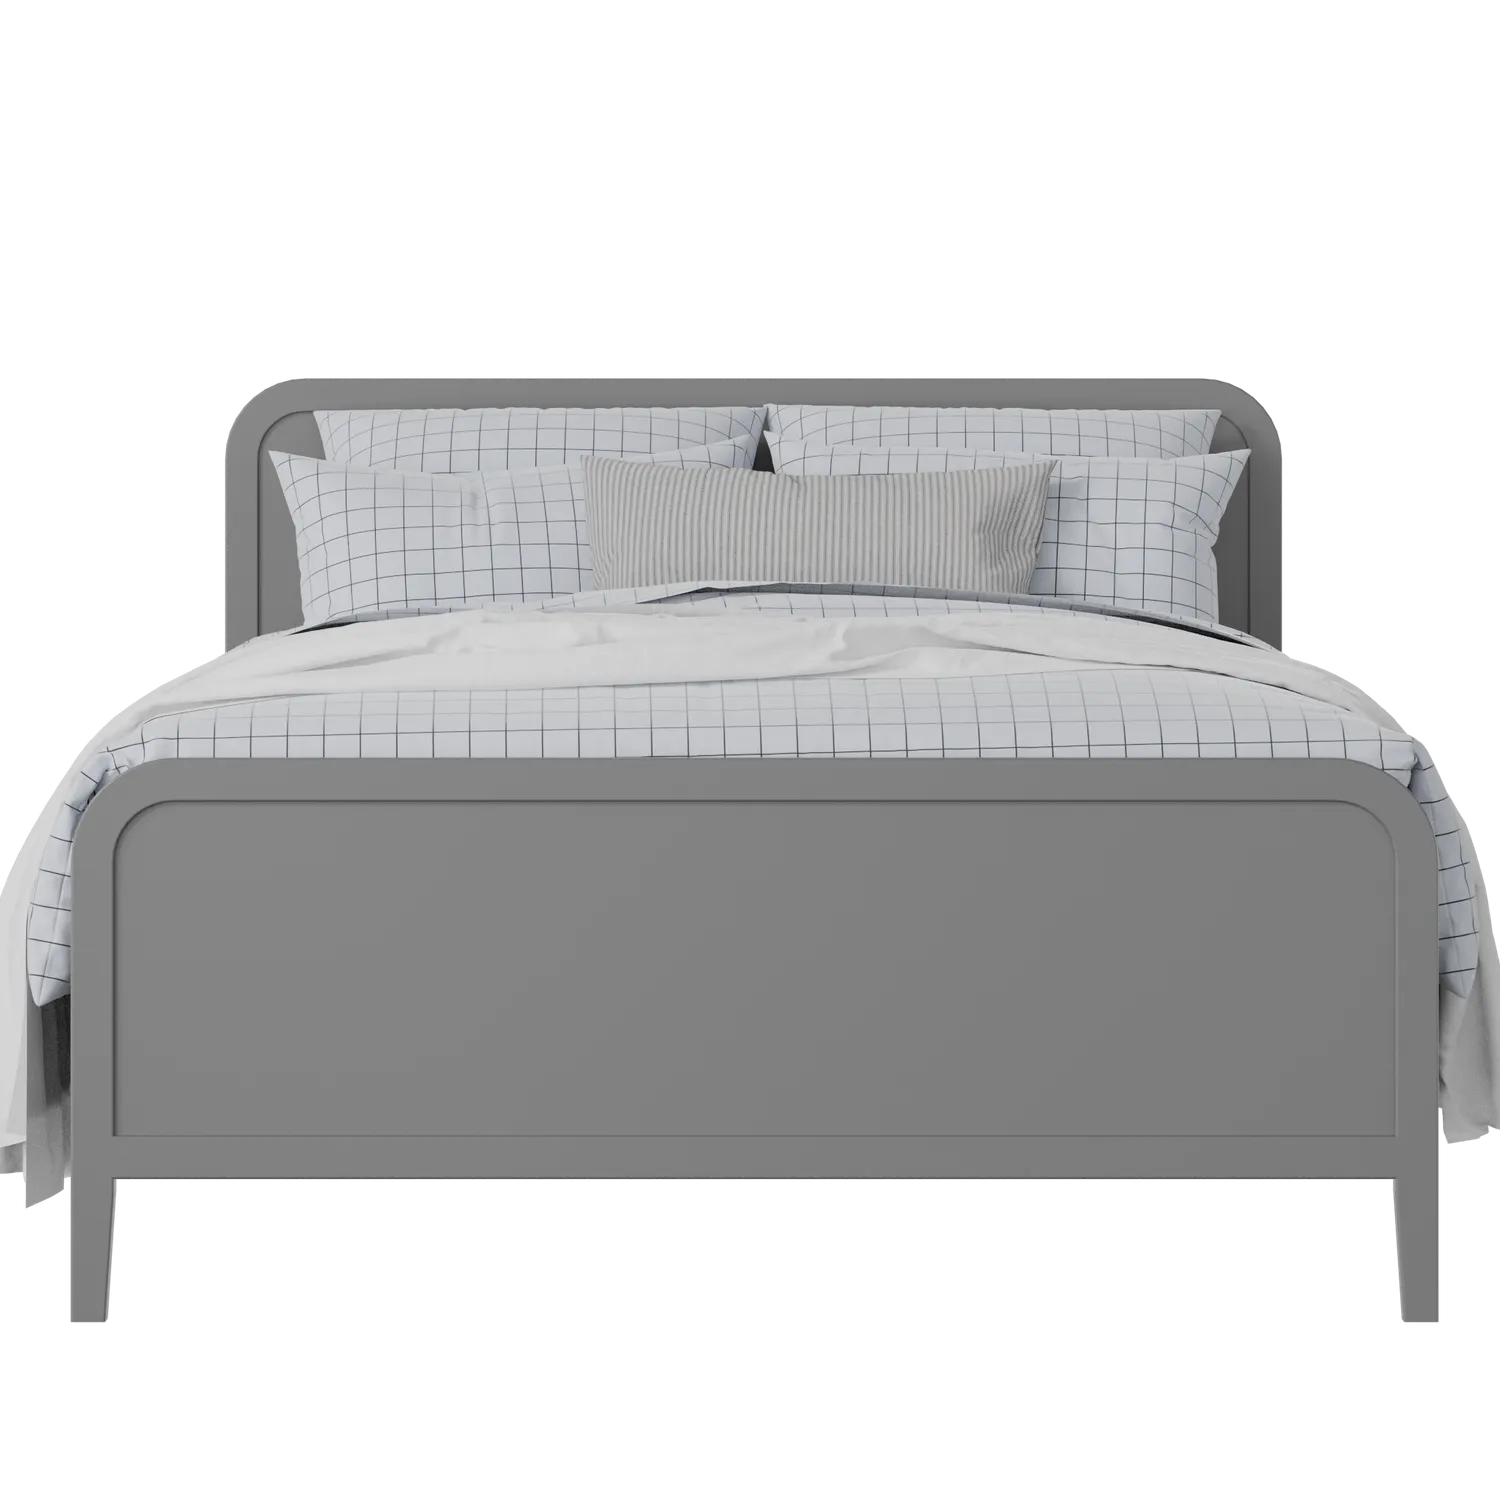 Keats Painted painted wood bed in grey with Juno mattress